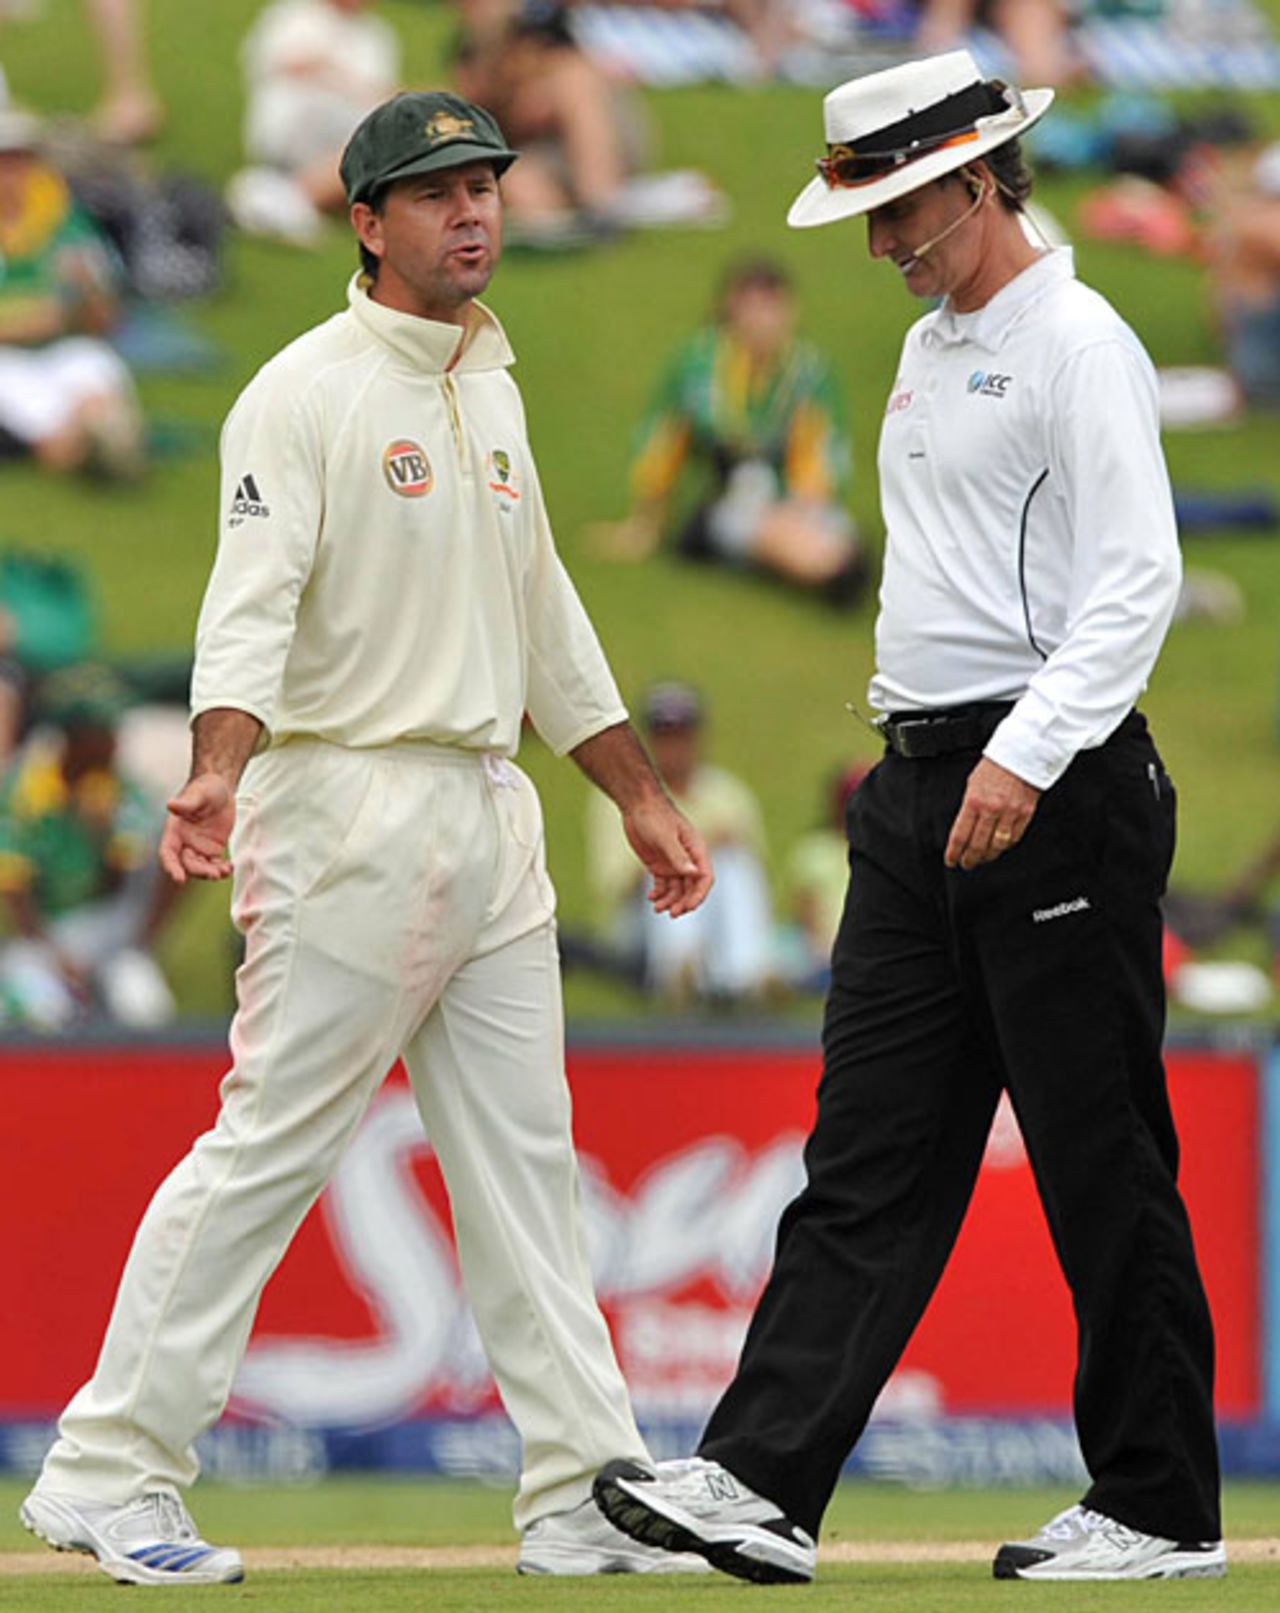 Ricky Ponting is not happy with a withdrawn referral, South Africa v Australia, 1st Test, Johannesburg, 3rd day, February 28, 2009